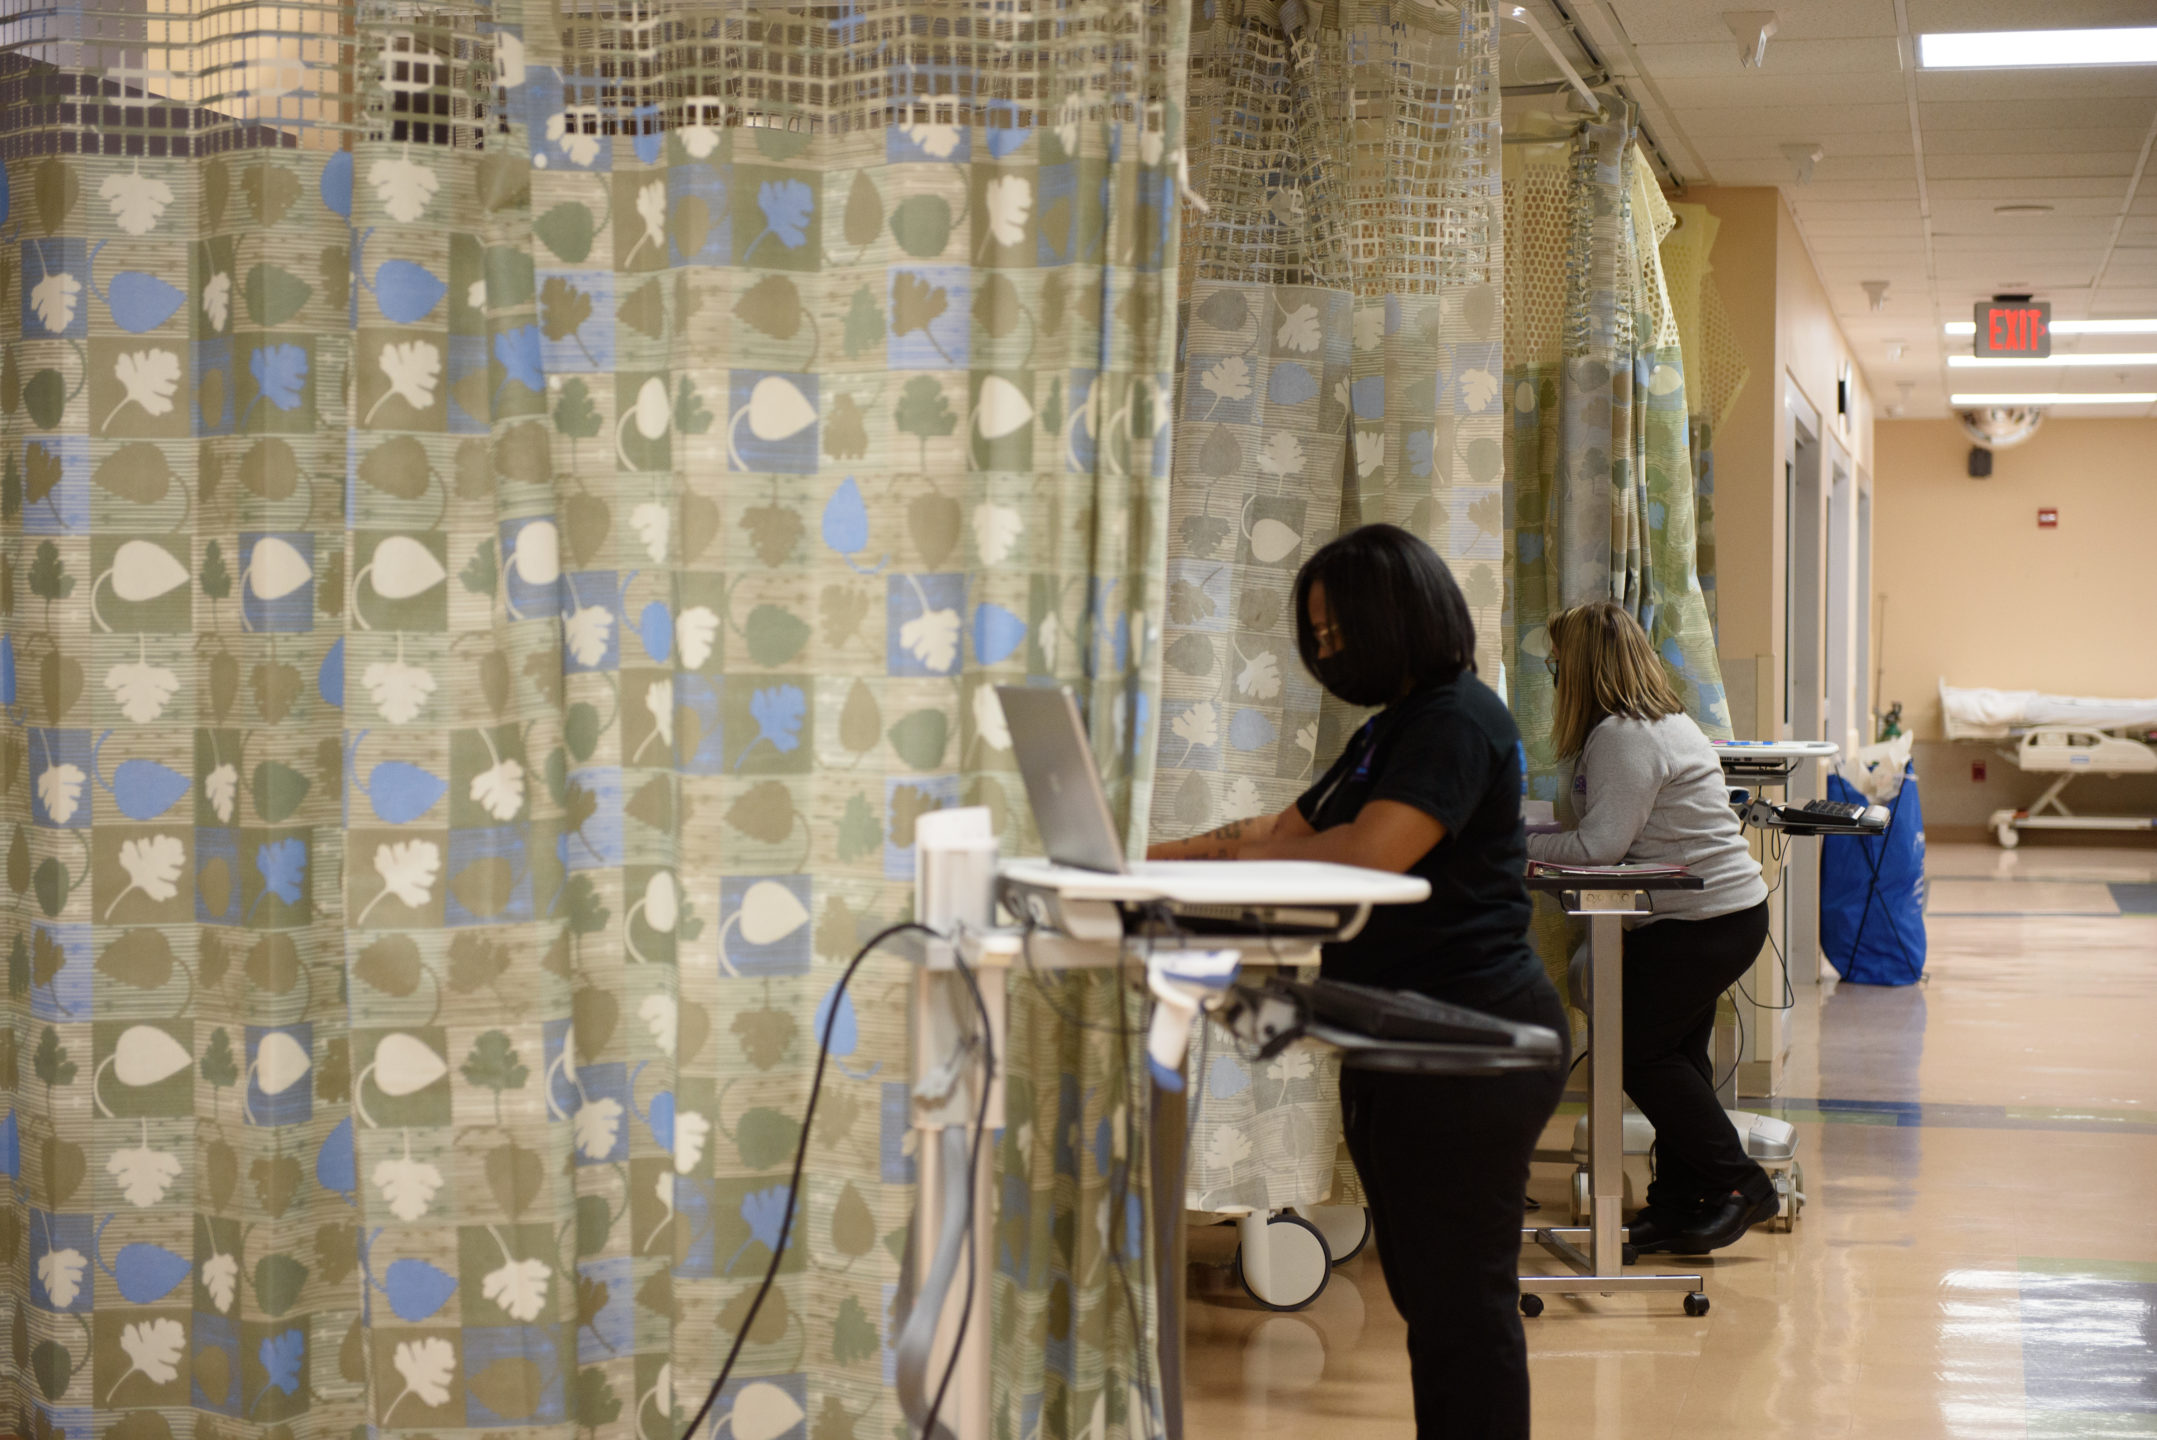 Staff work with patients behind curtained areas. 